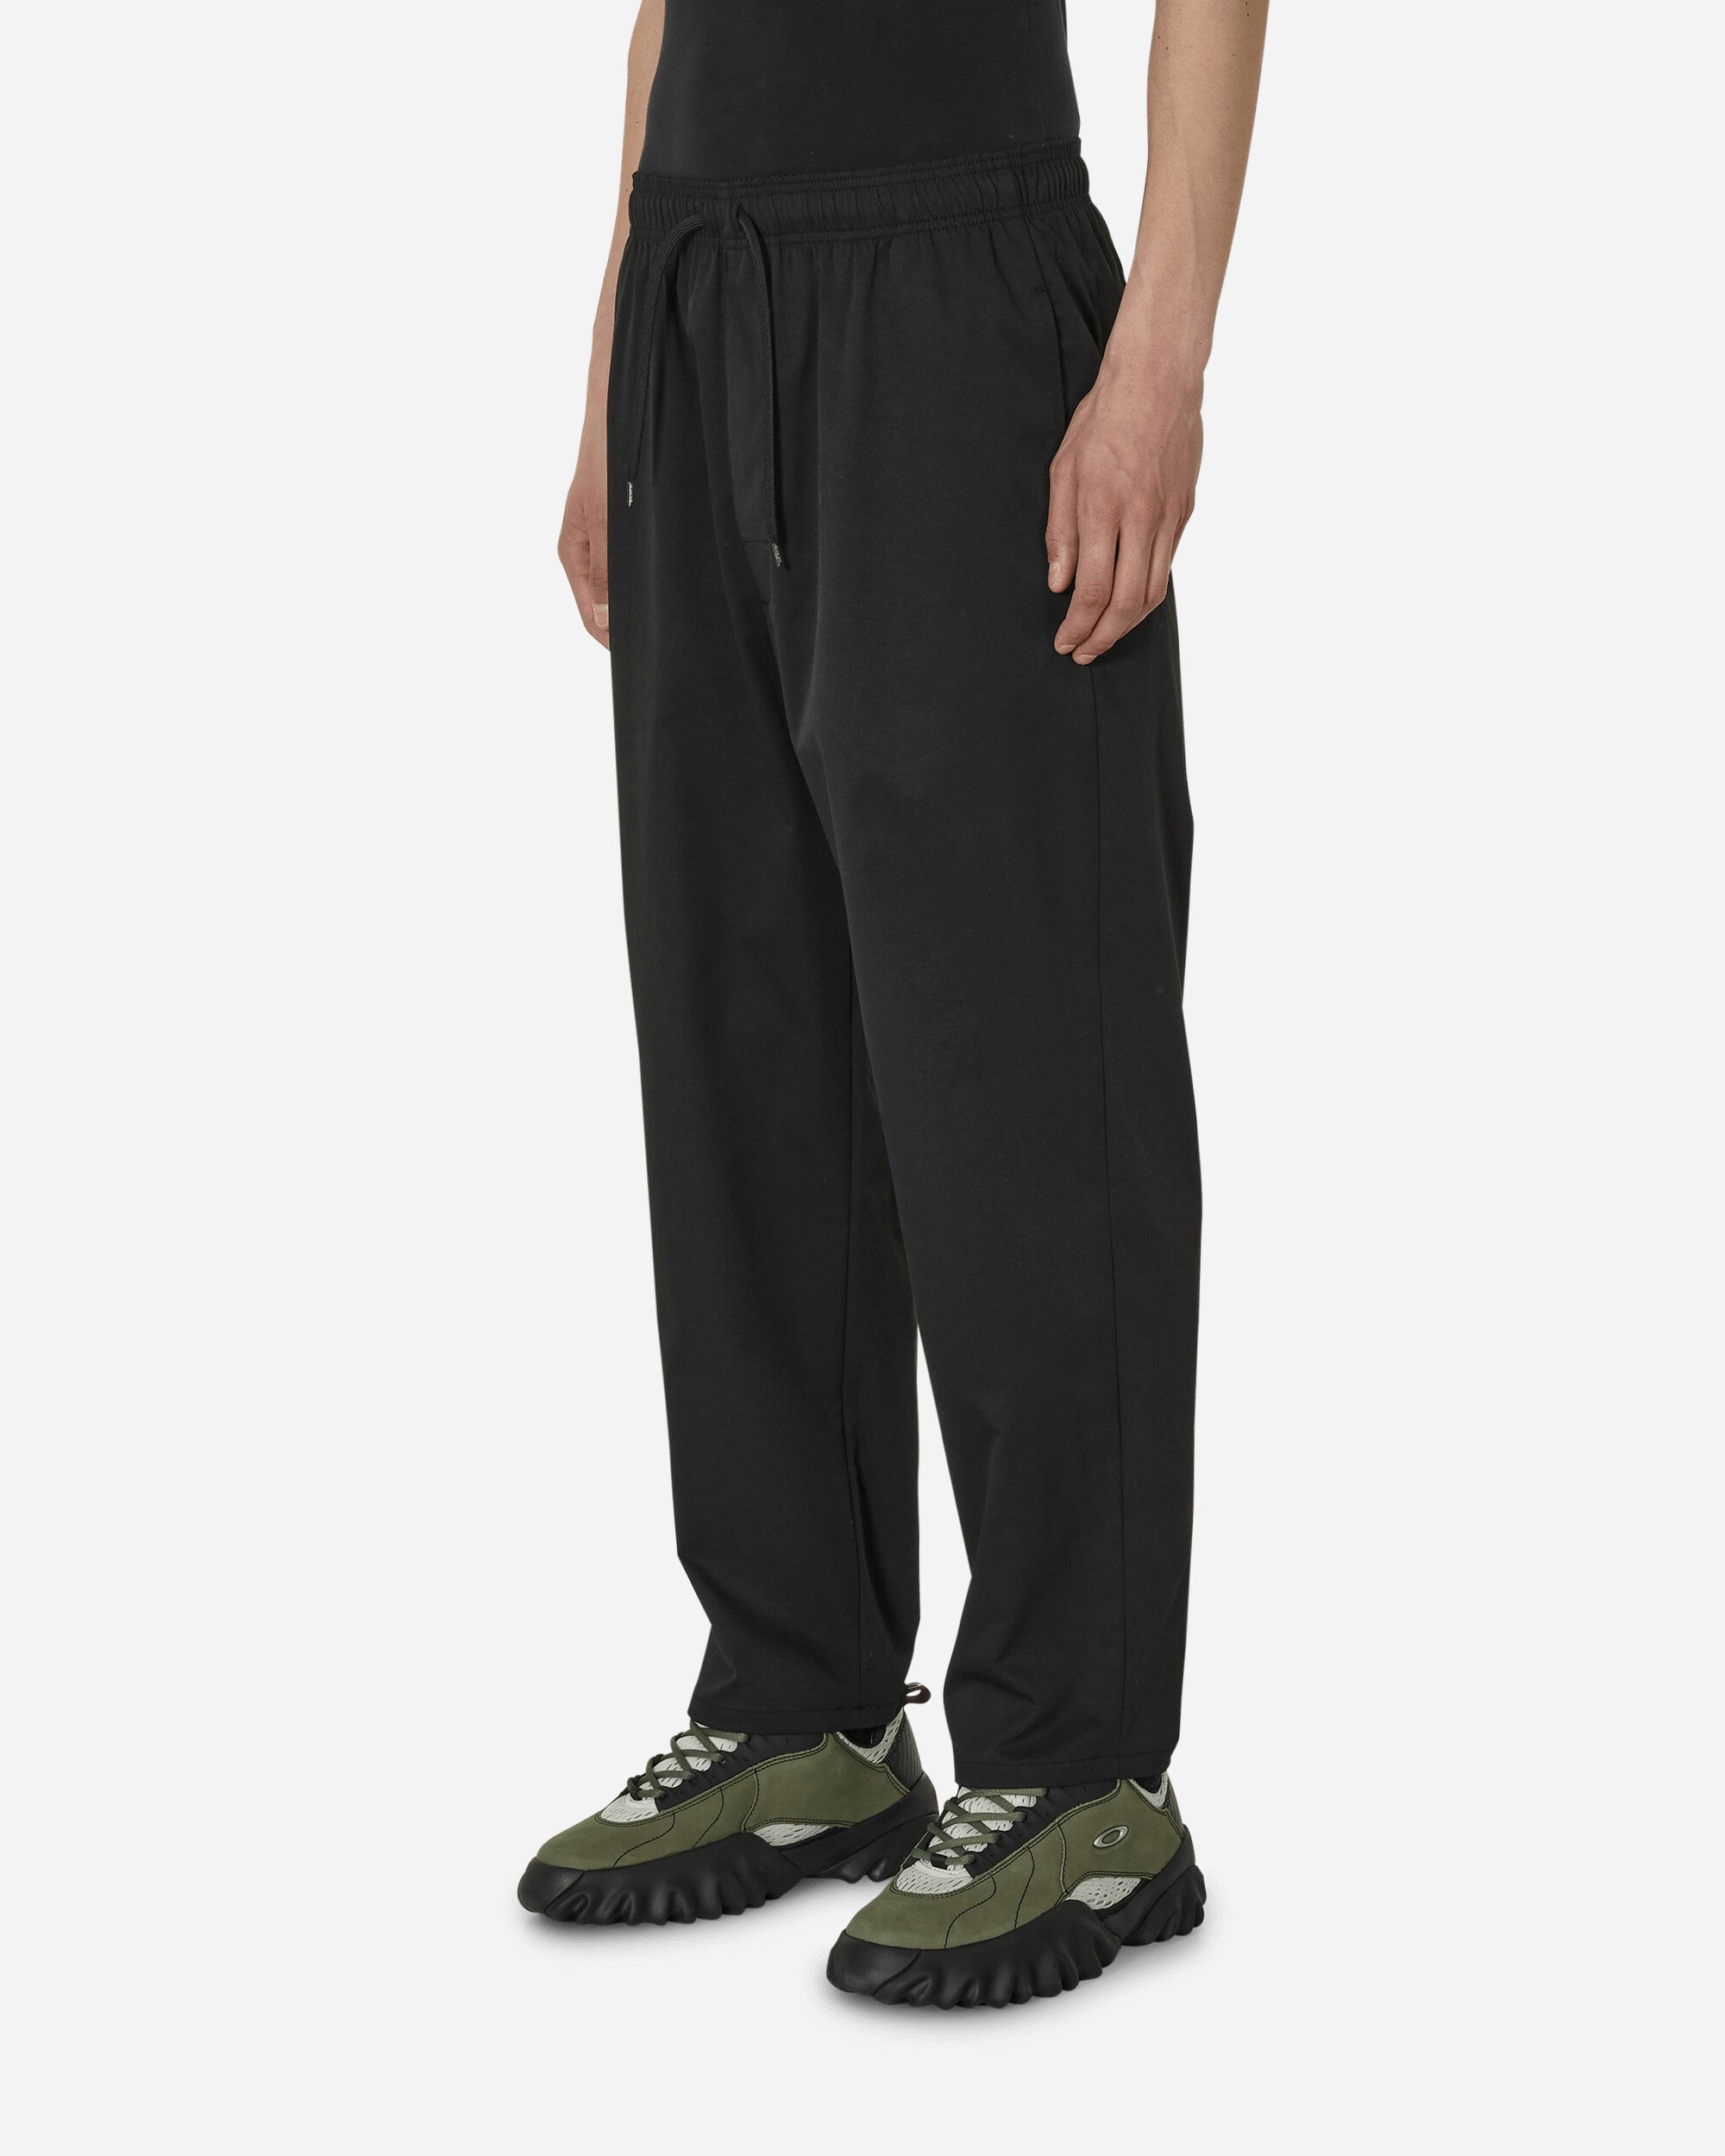 WTAPS 23ss SEAGULL 01 TROUSERS POLY TWIL-